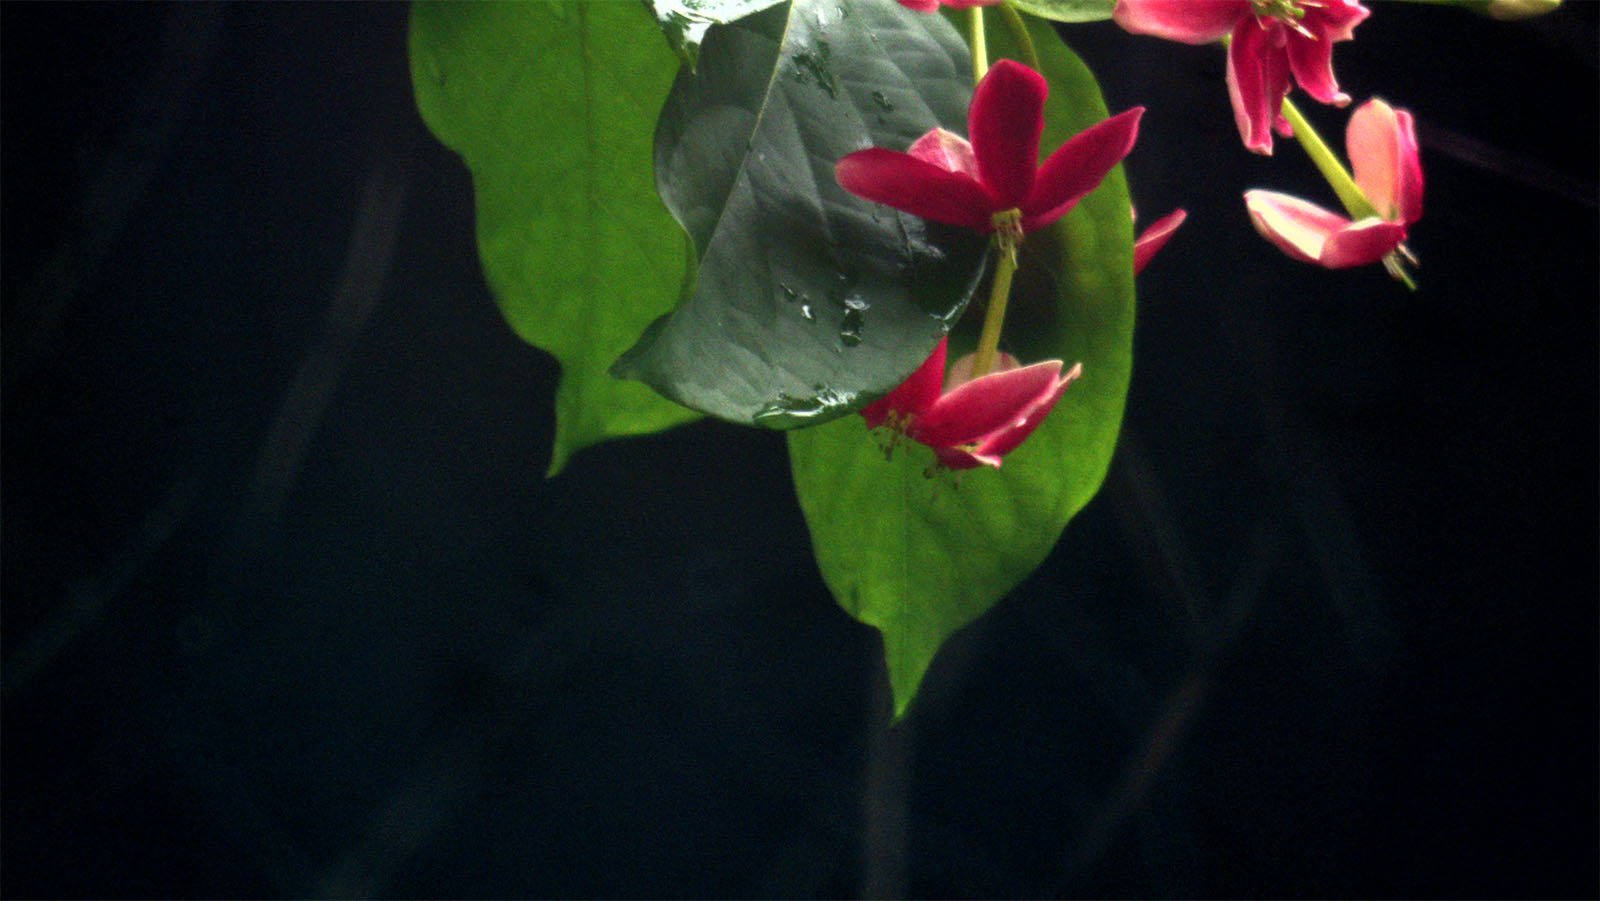 Close-up of vibrant pink flowers and a large green leaf partially submerged in dark water, with light reflecting on the water's surface.